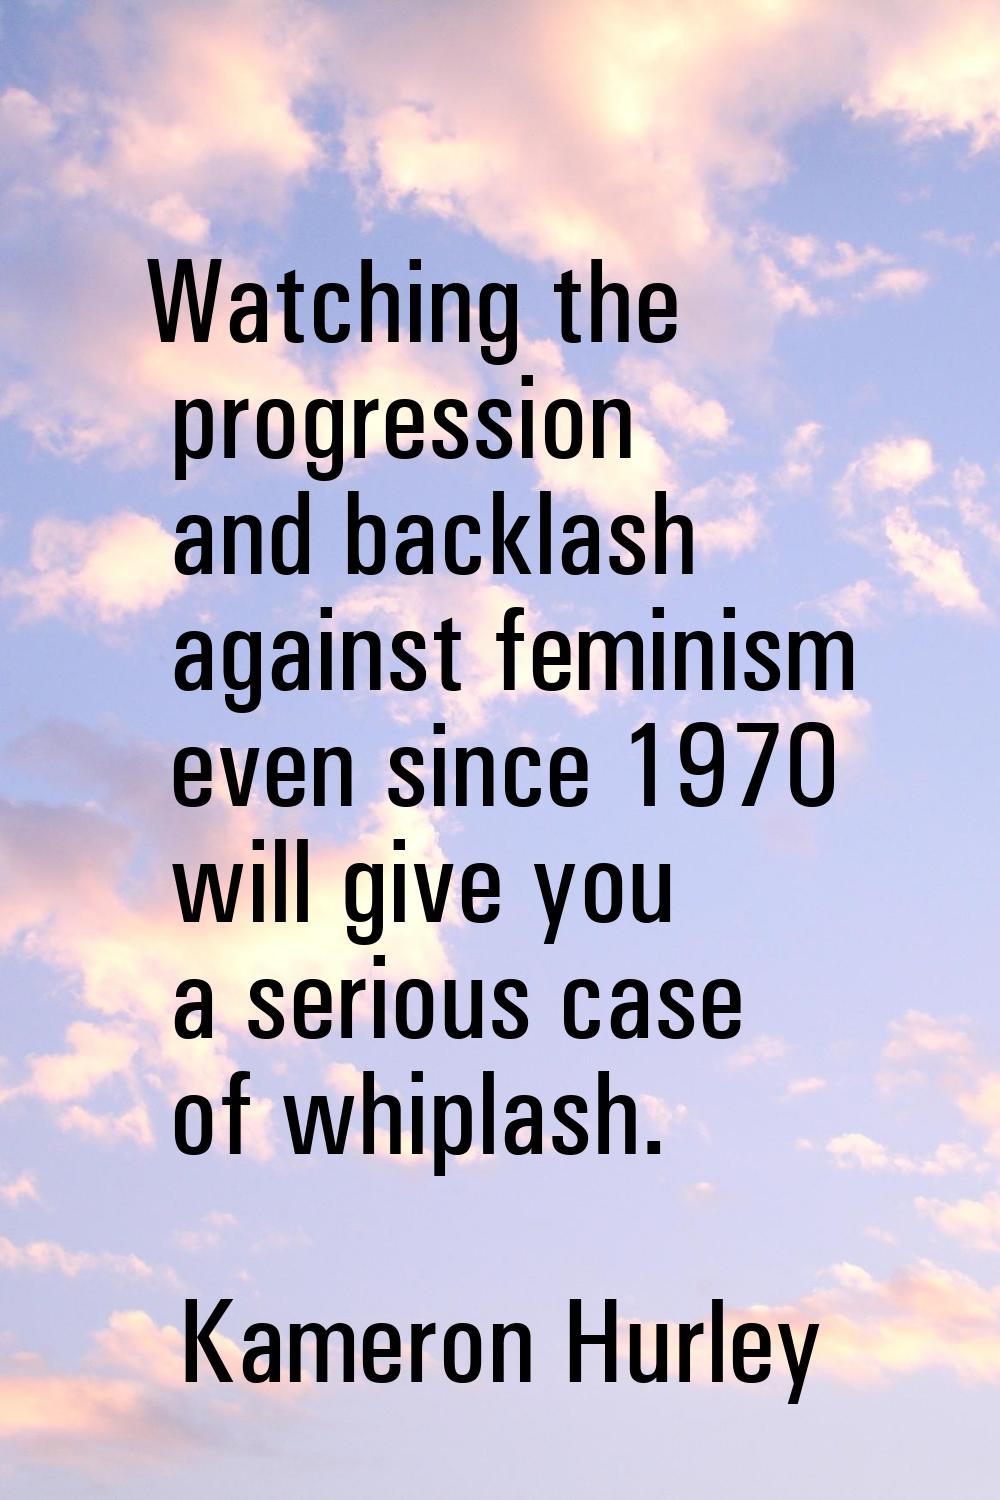 Watching the progression and backlash against feminism even since 1970 will give you a serious case